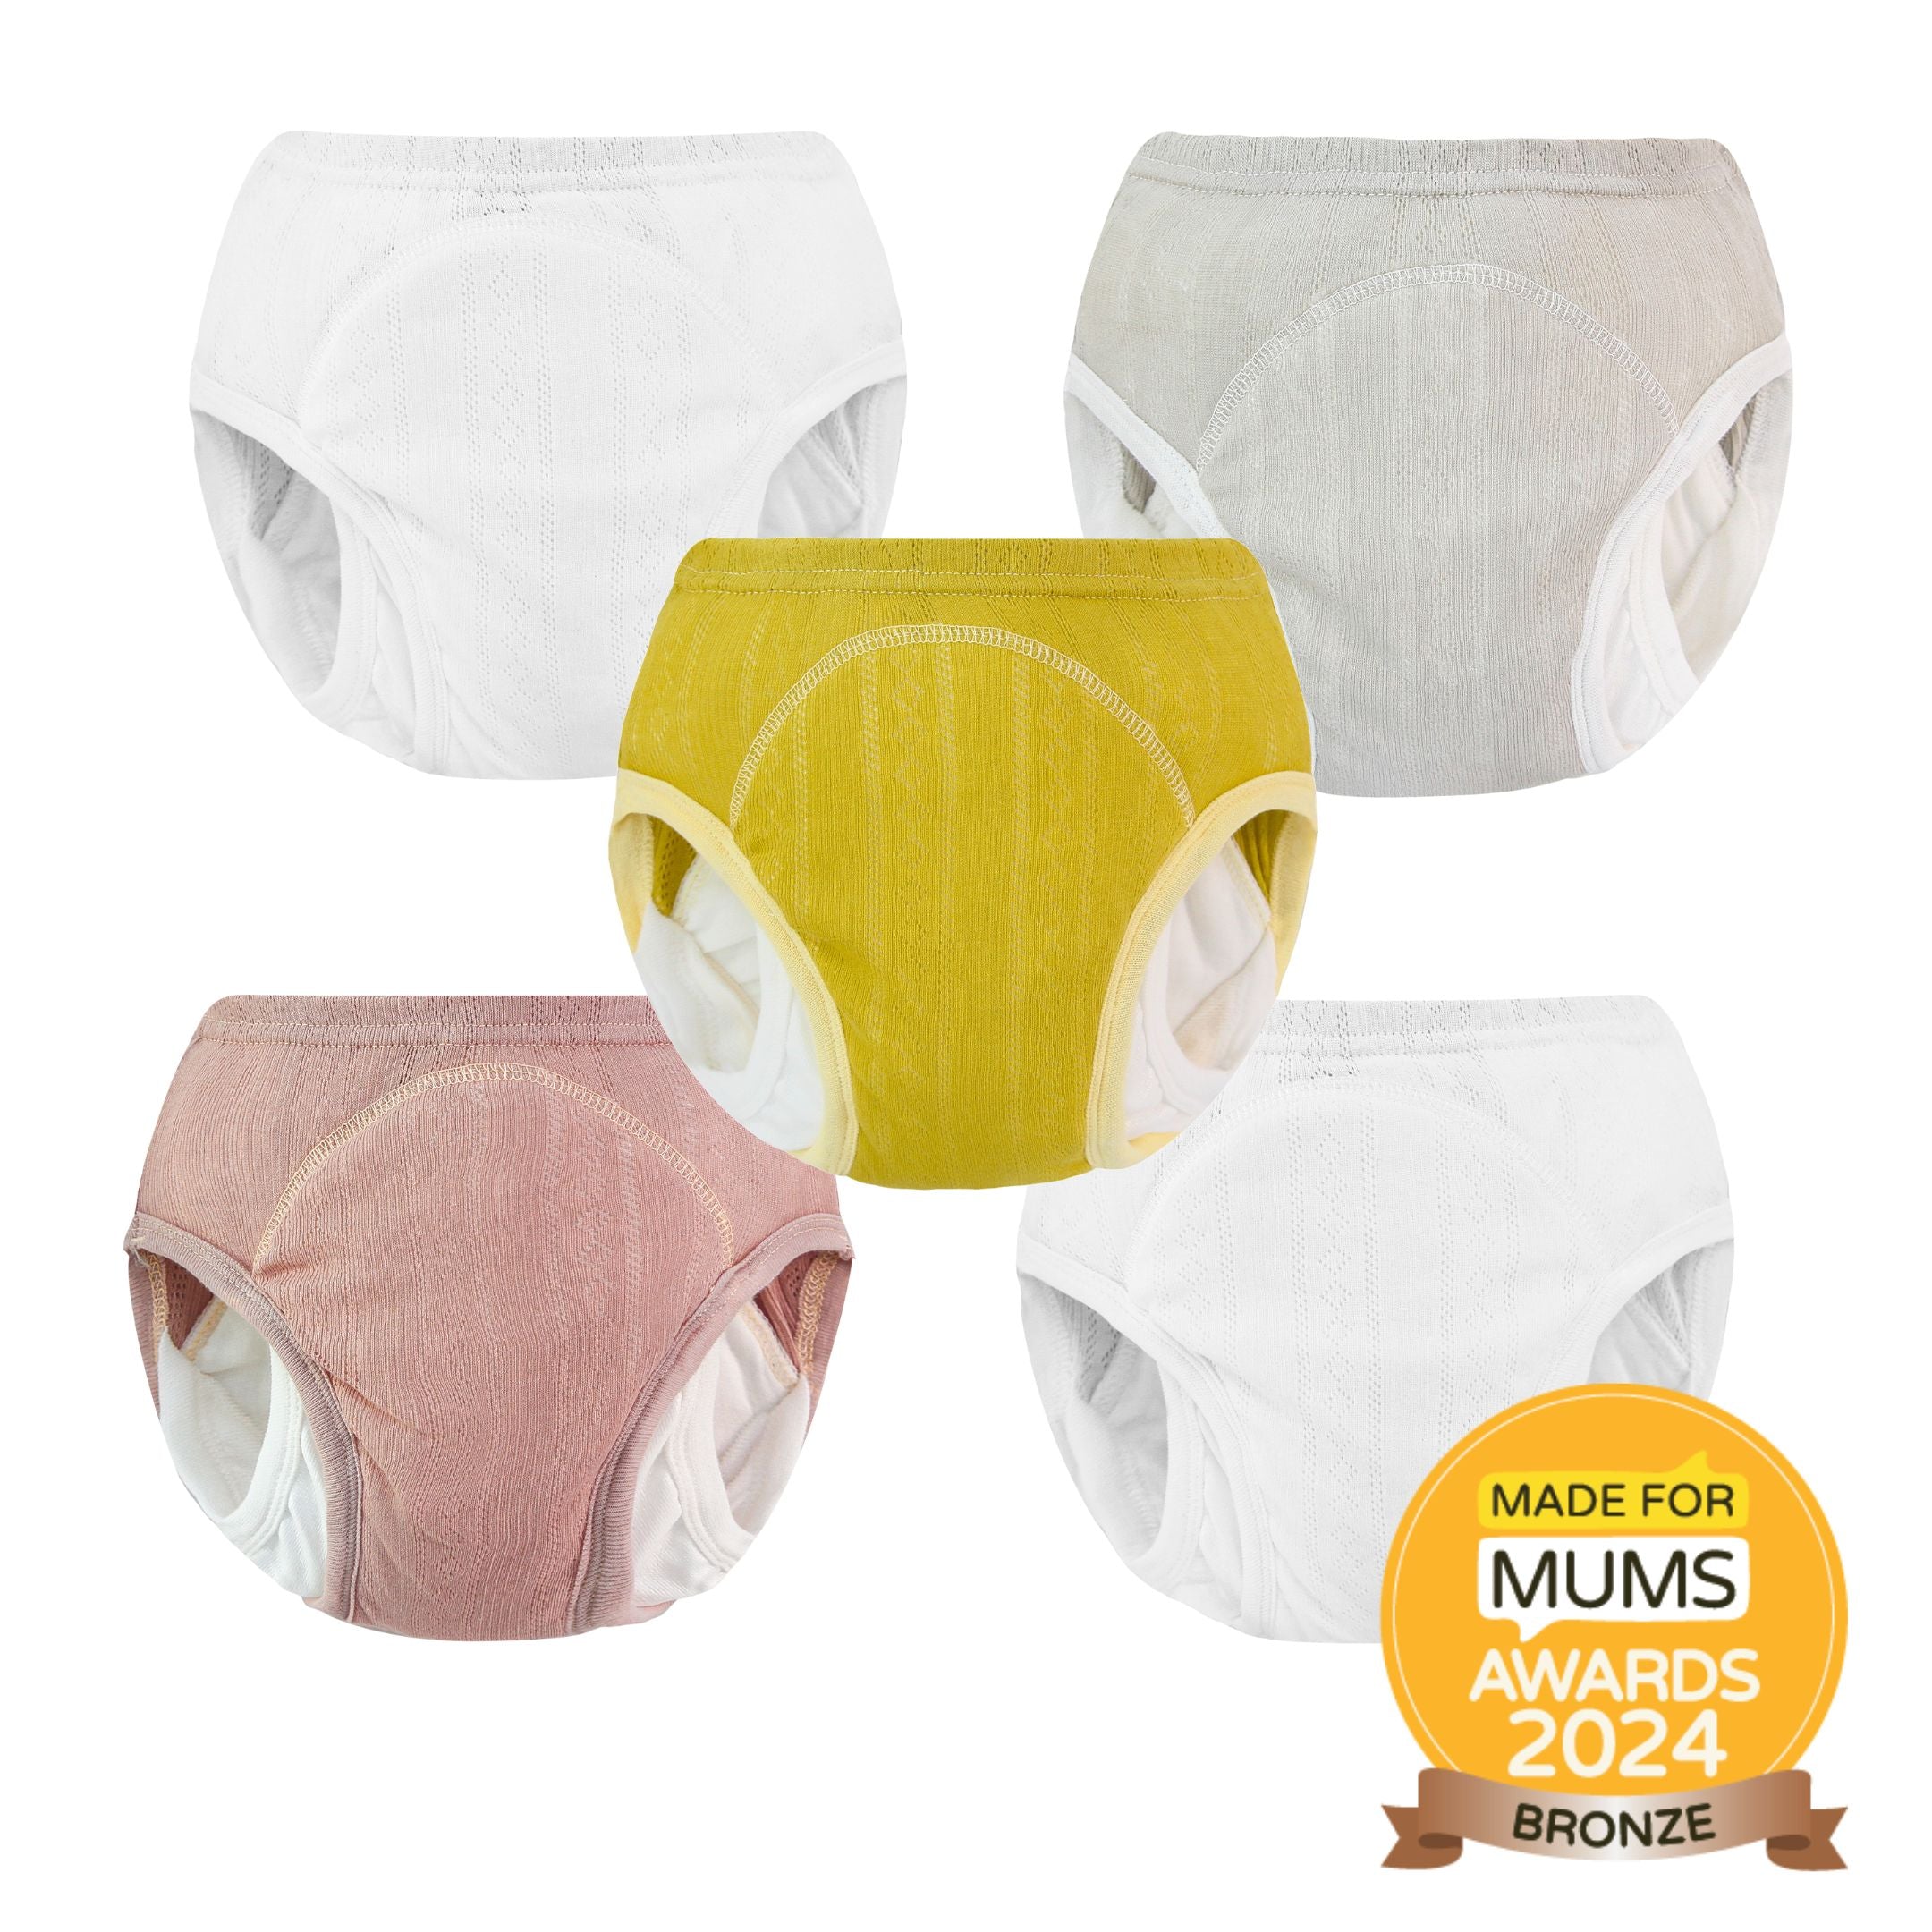 Zikku's Potty Training Pants for Toddlers – Associated Health Care